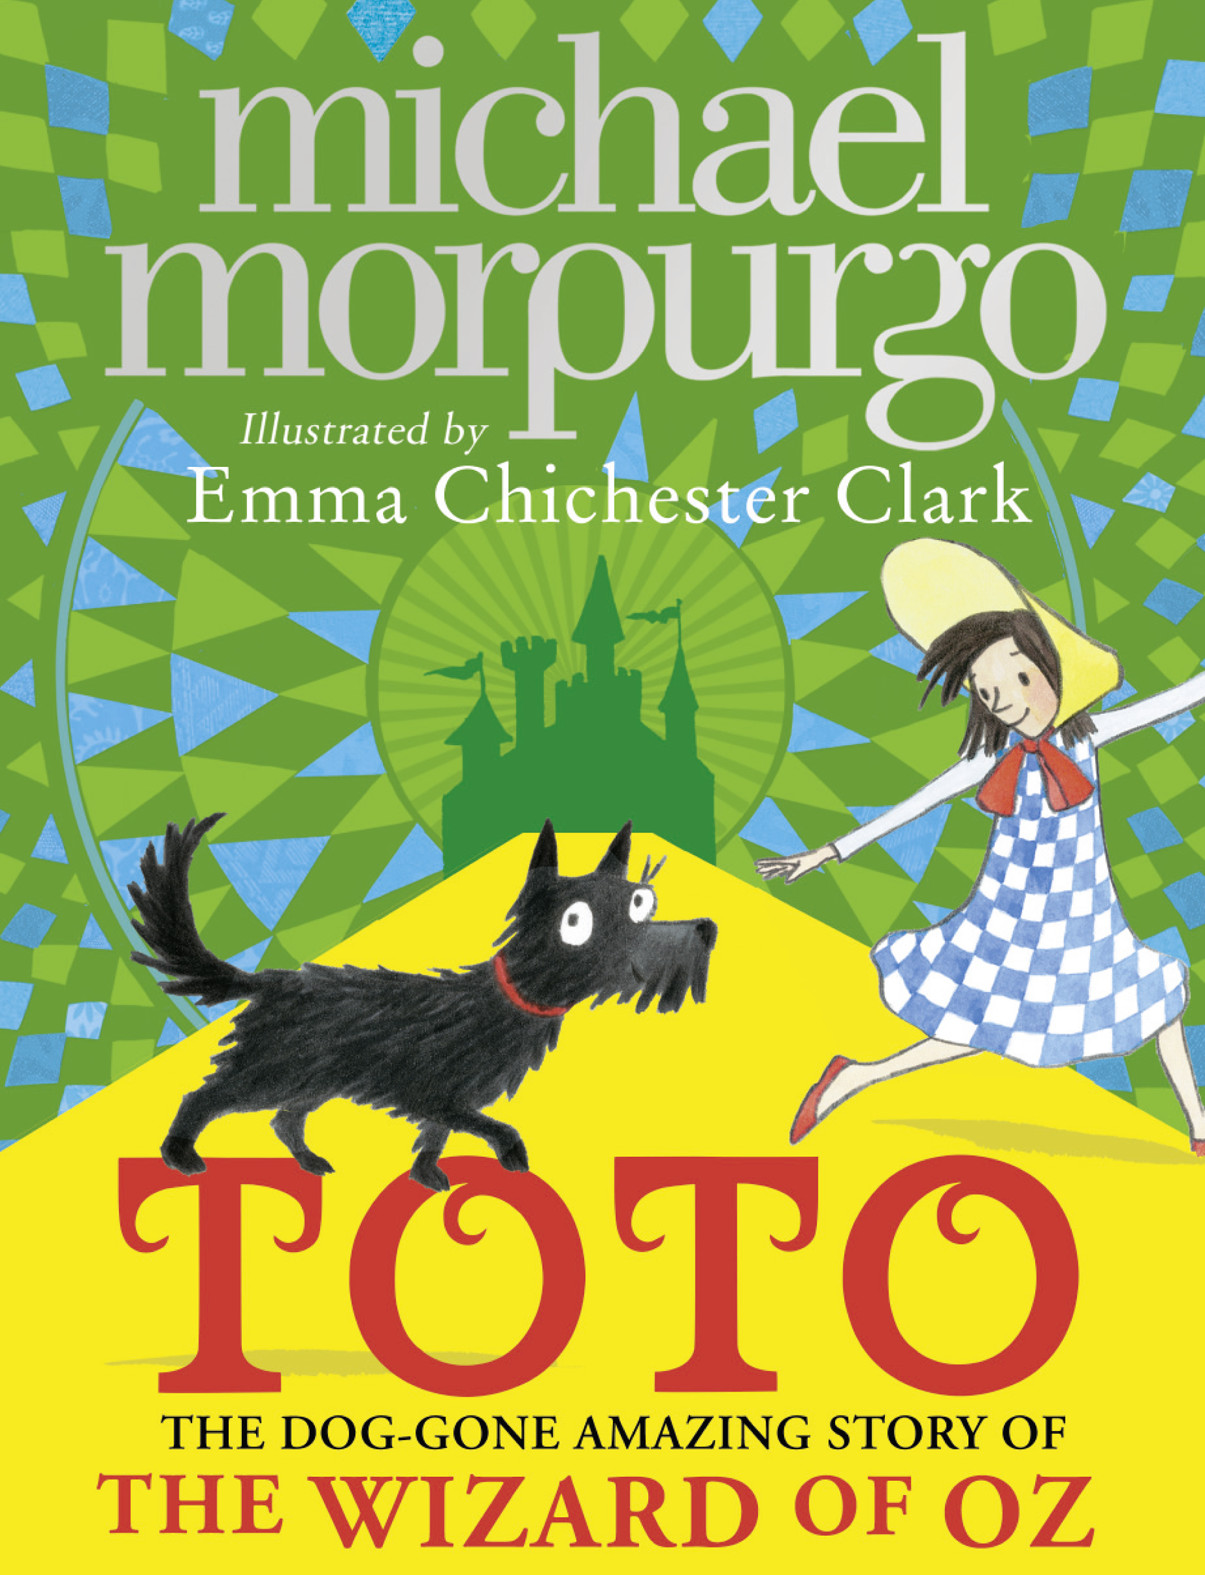 Toto by Michael Morpurgo book jacket image